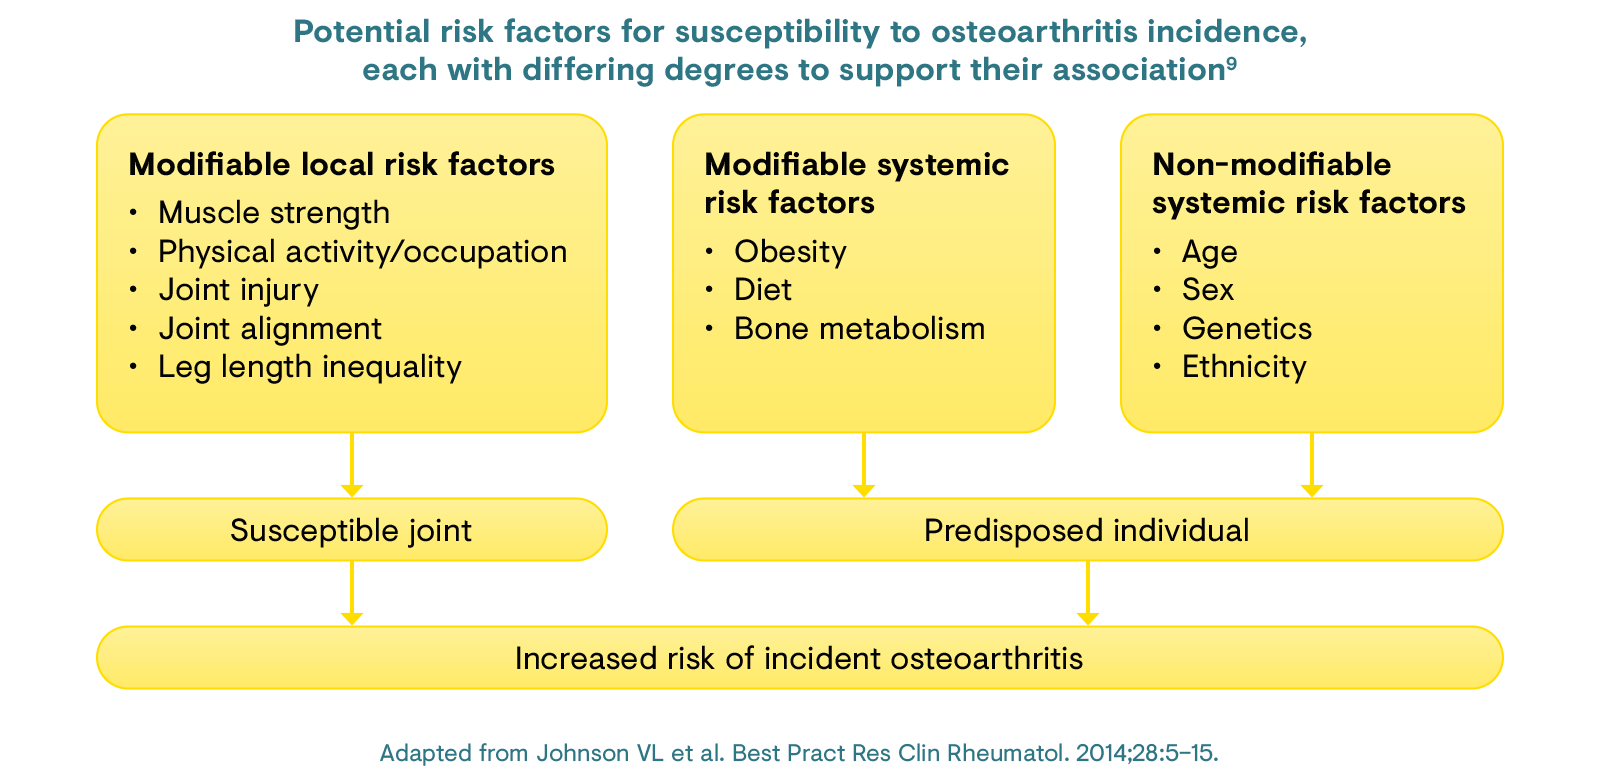 Potential risk factors for susceptibility to osteoarthritis incidence